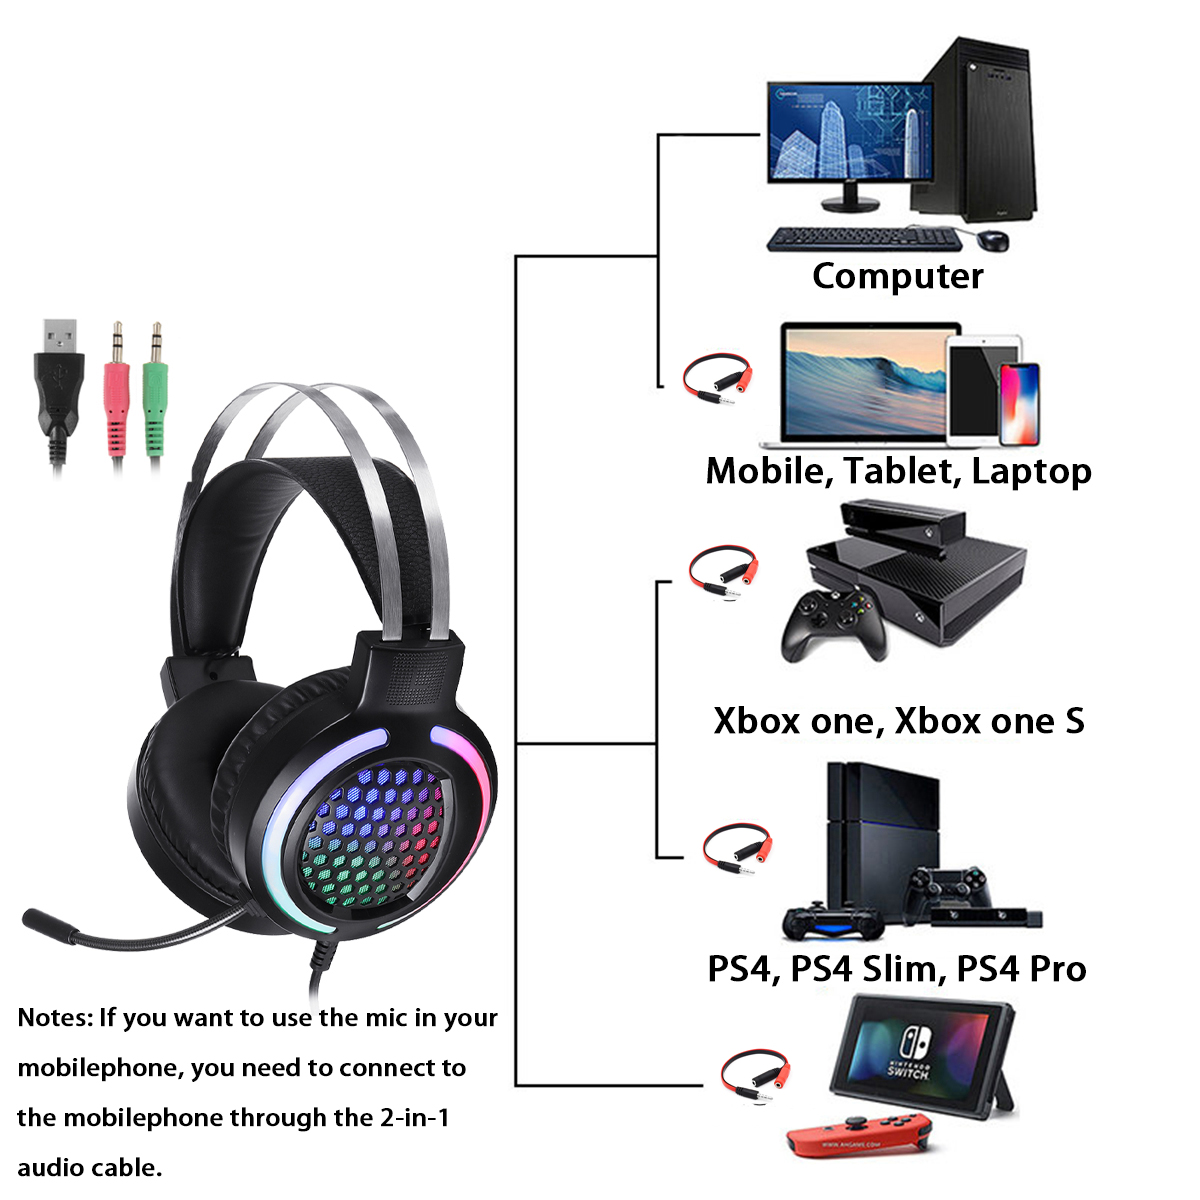 Bakeey-USB--35mm-Stereo-Gaming-Headsets-Noise-Cancelling-Surround-Sound-Headphone-with-LED-Light-Mic-1831516-9